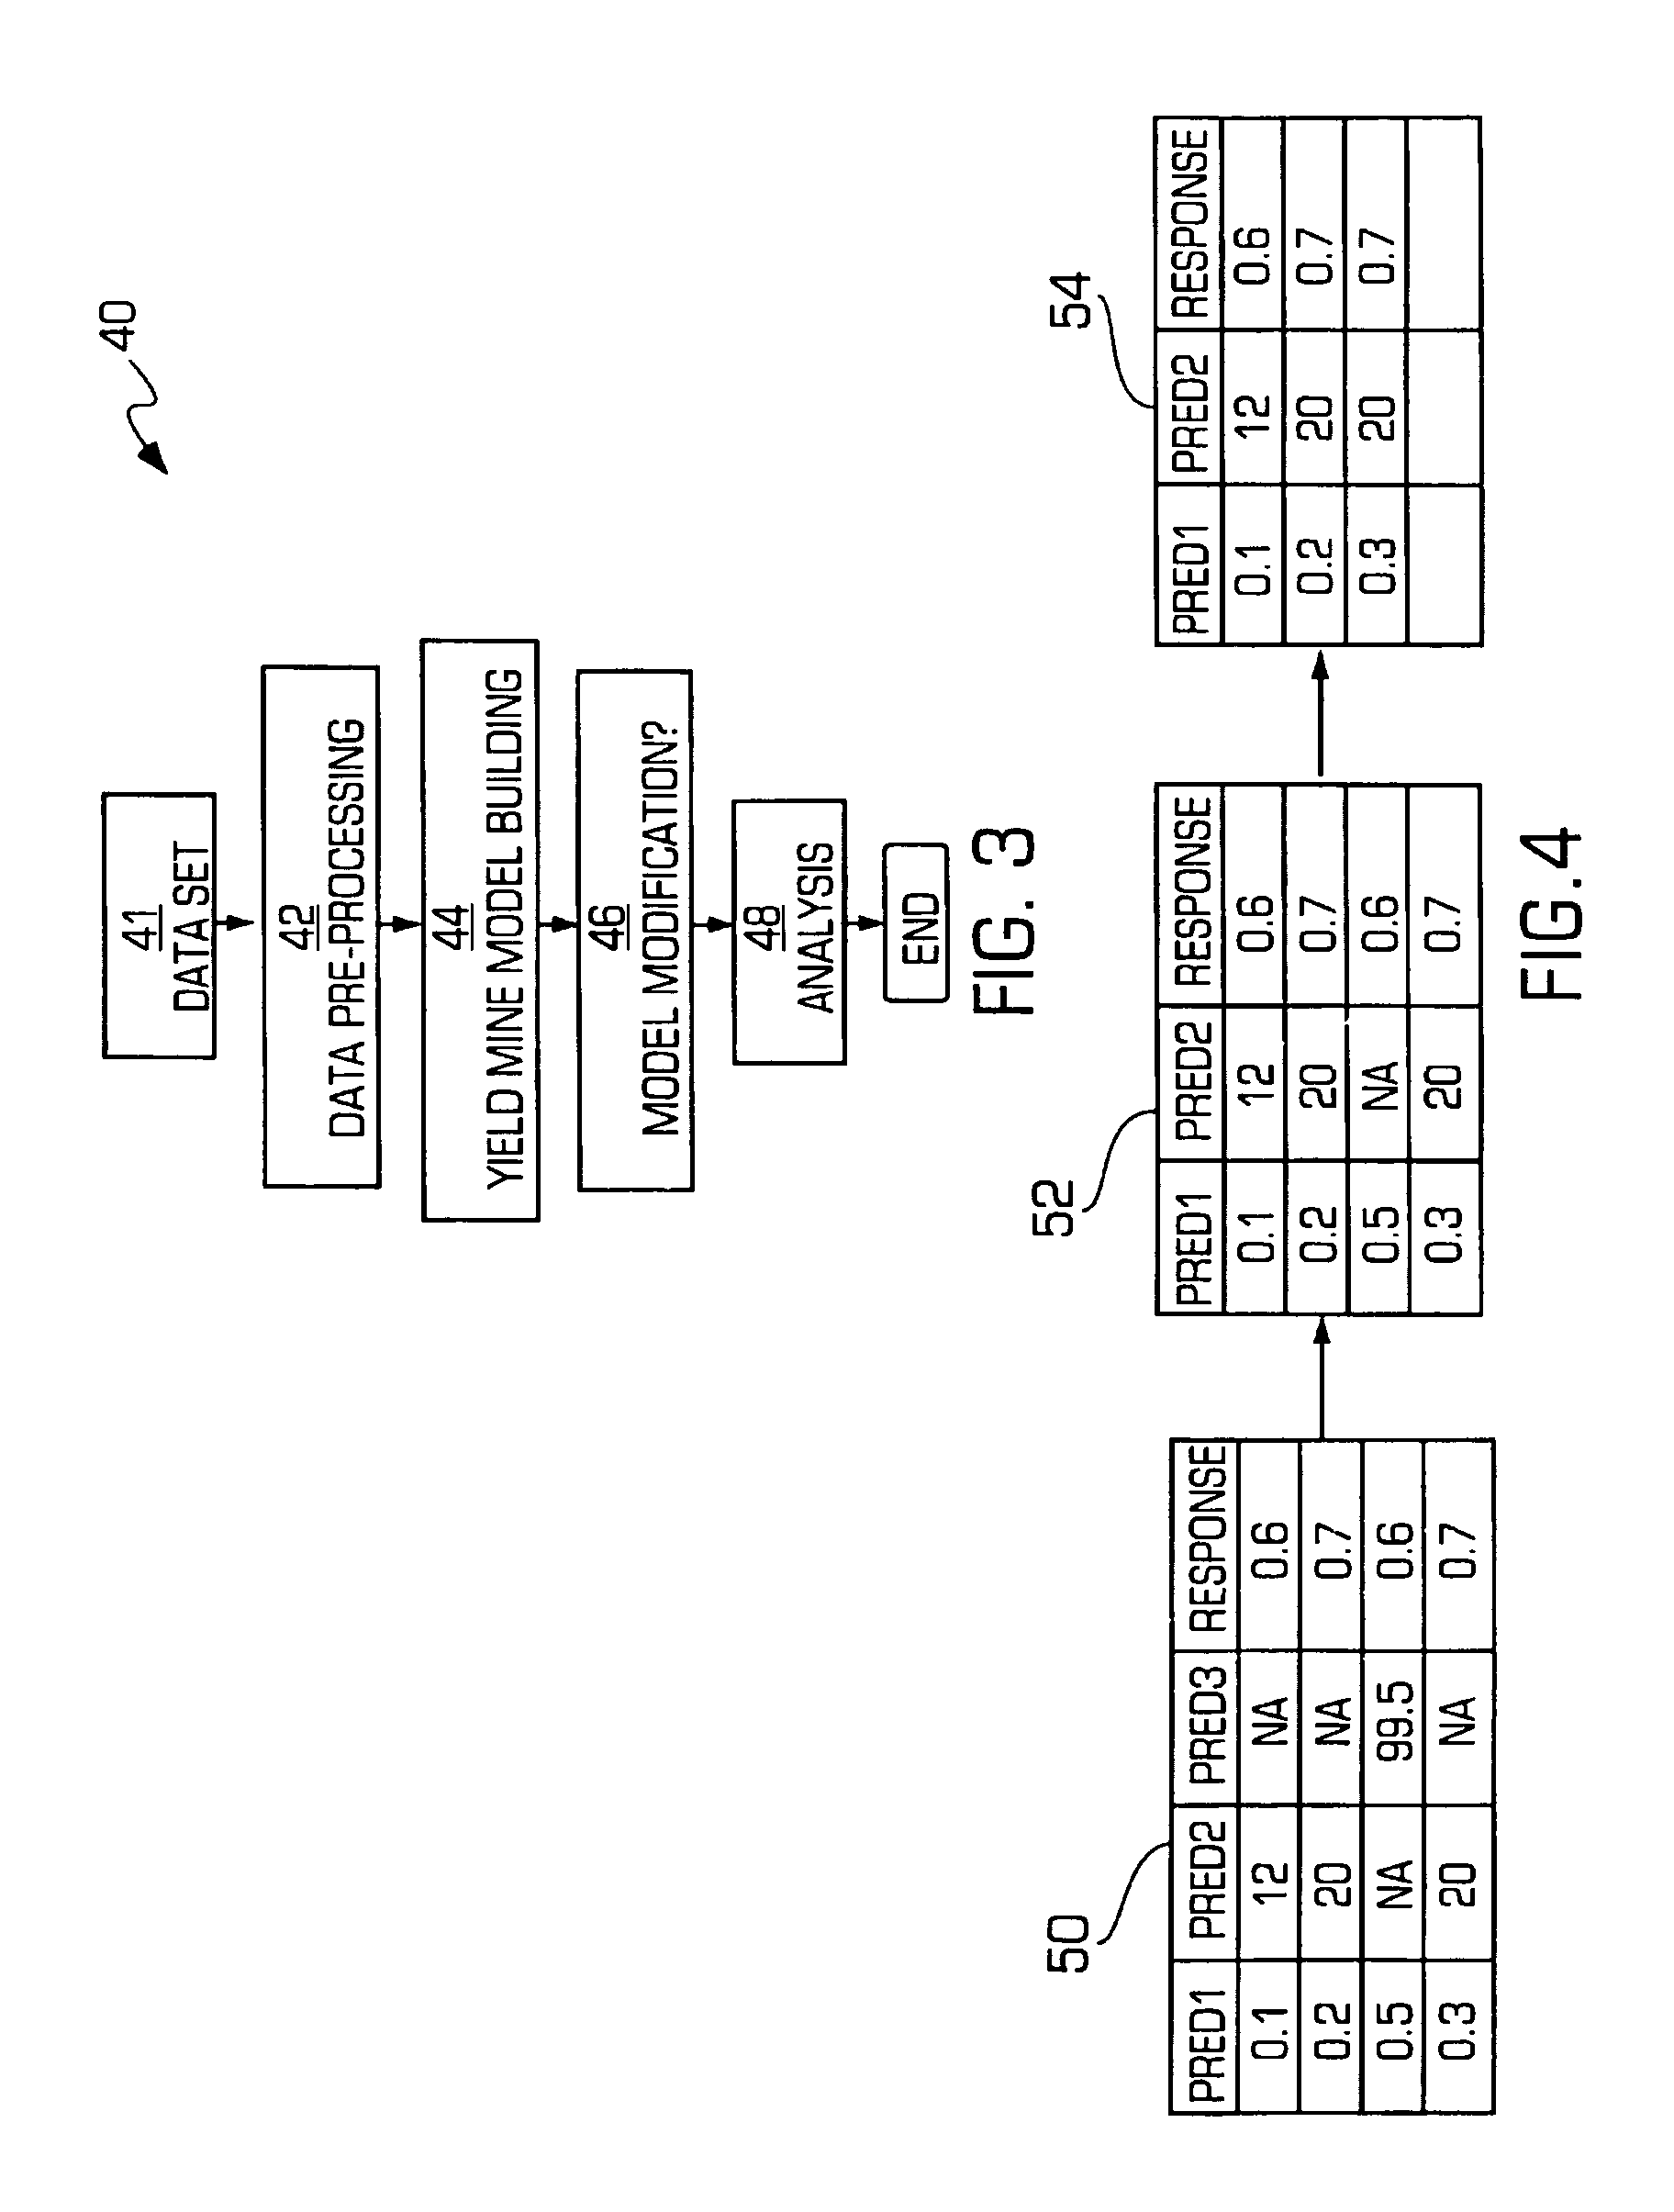 Semiconductor yield management system and method